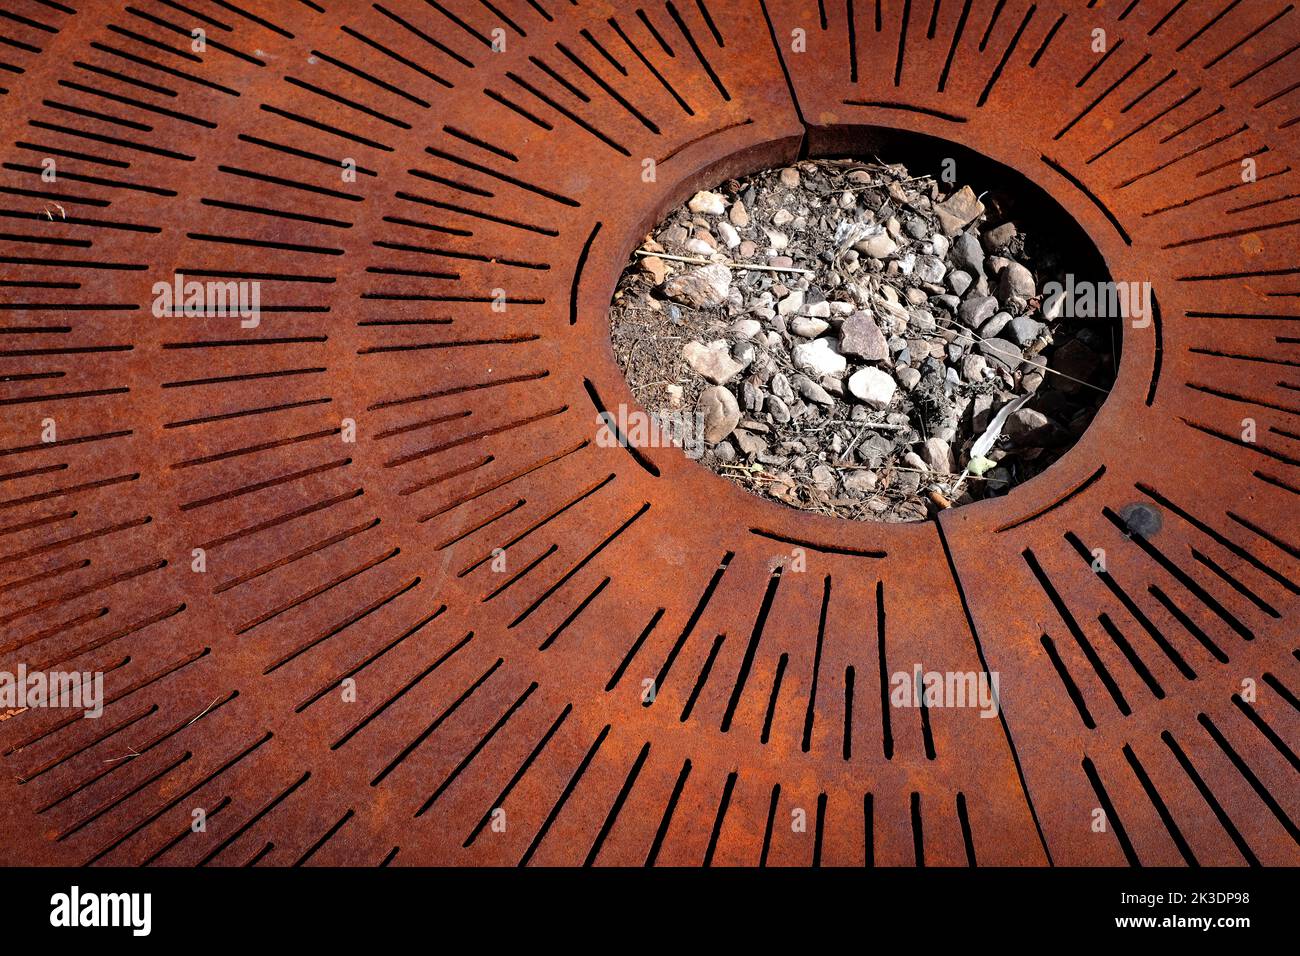 Rusty metal grate texture with rocks and soil in circle shape Stock Photo